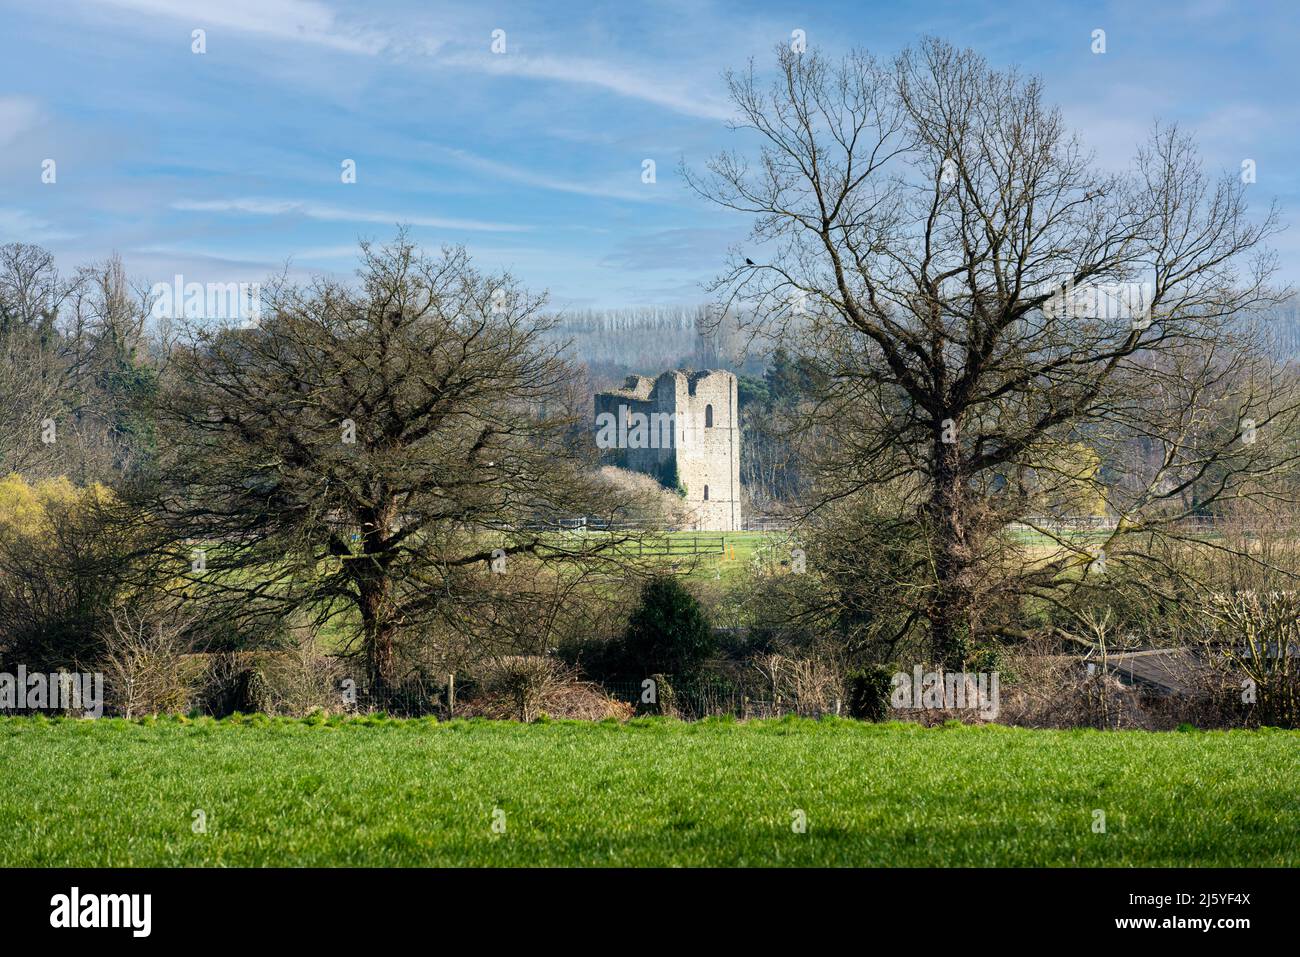 St Leonards Tower in West Malling near Maidstone in Kent, England Stock Photo